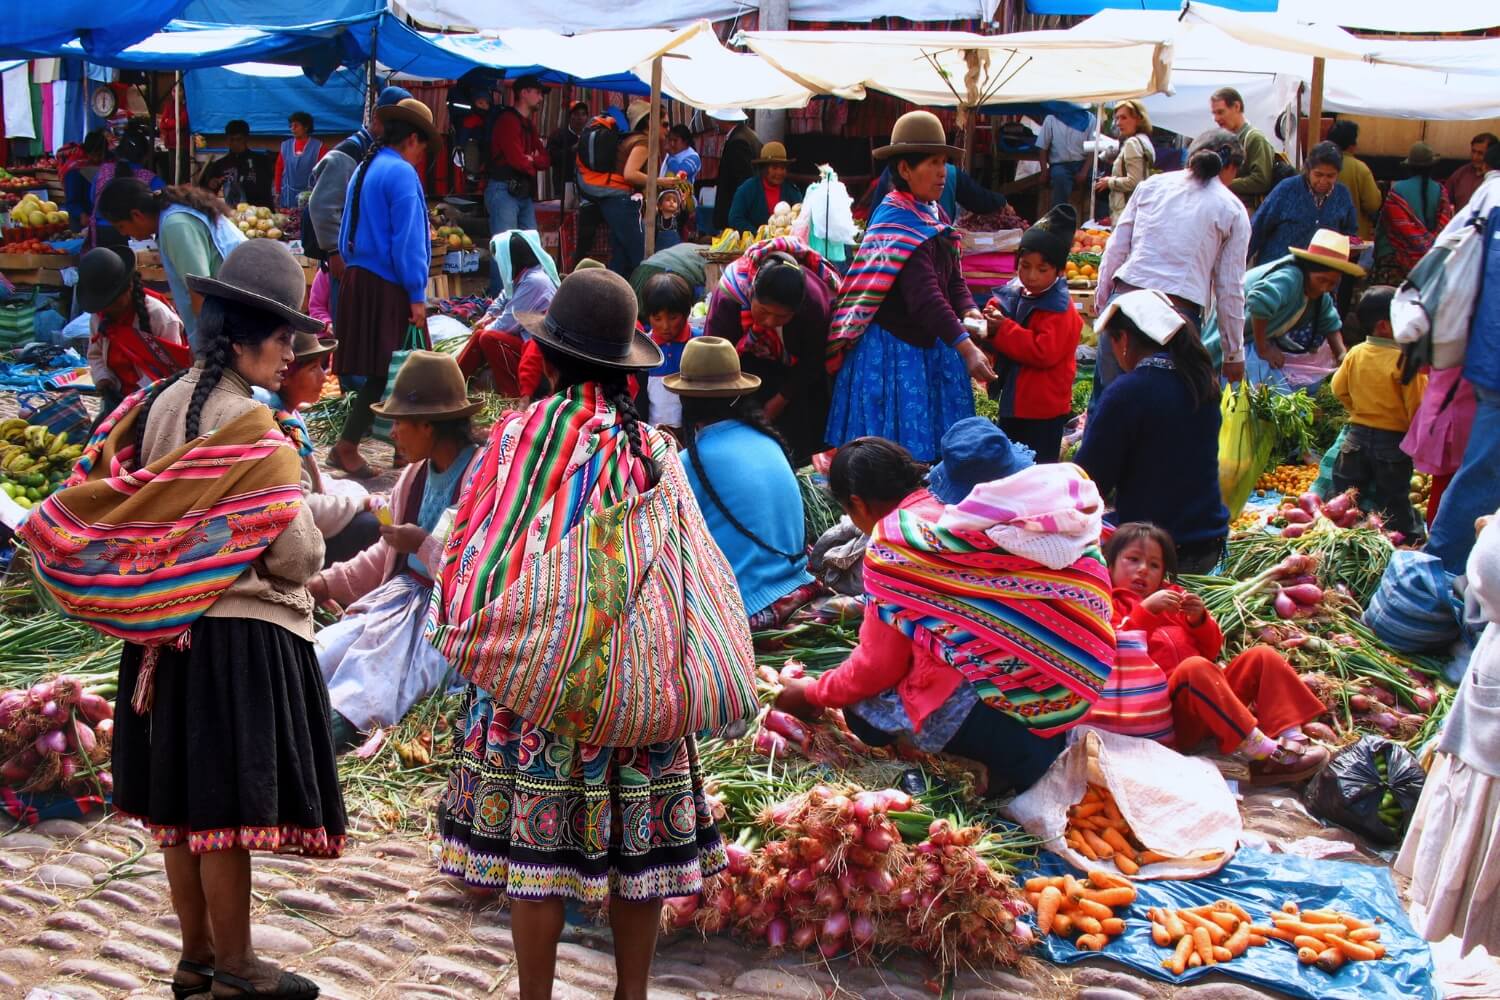 THE MOST POPULAR SACRED VALLEY TOURS FROM CUSCO